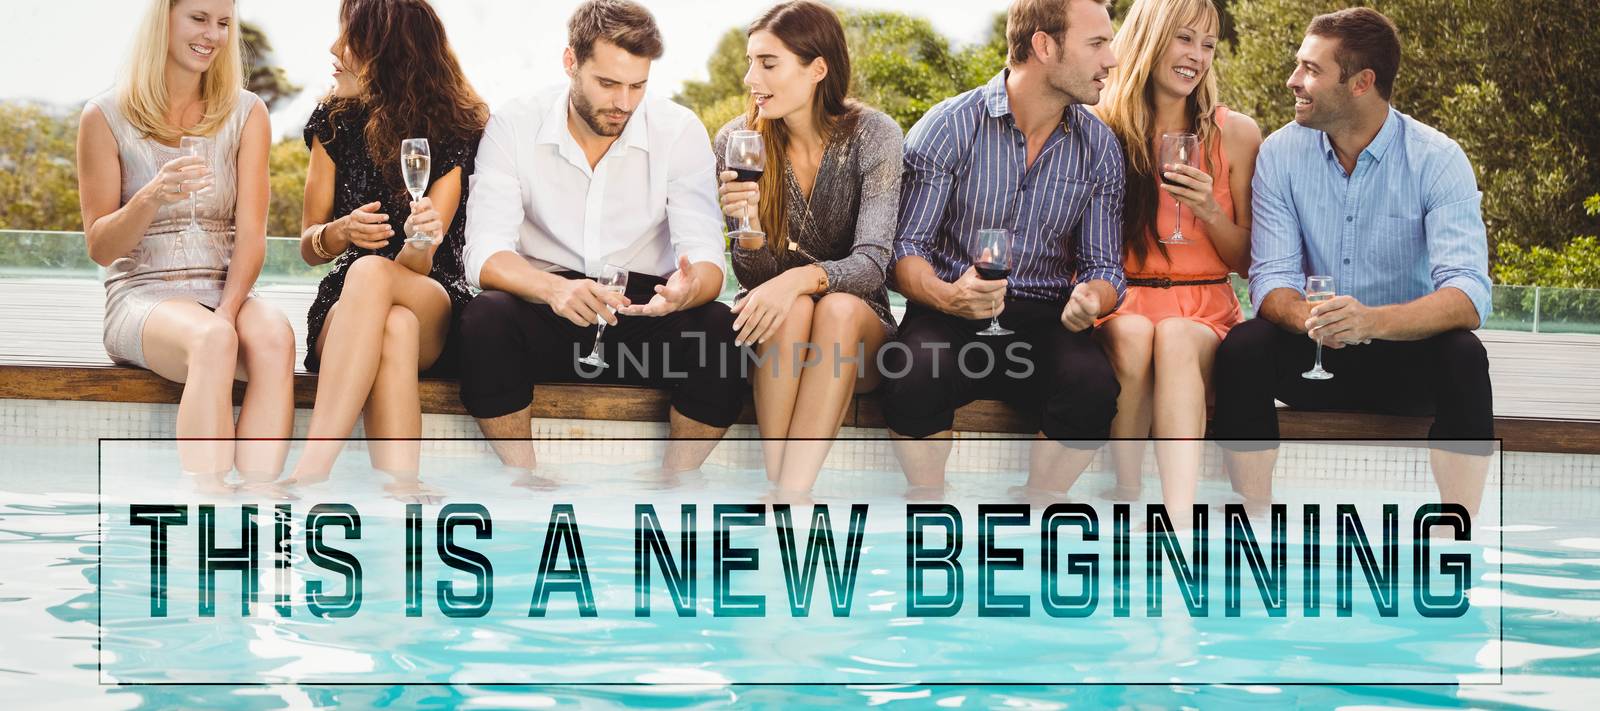 Motivational new years message against young people sitting by swimming pool